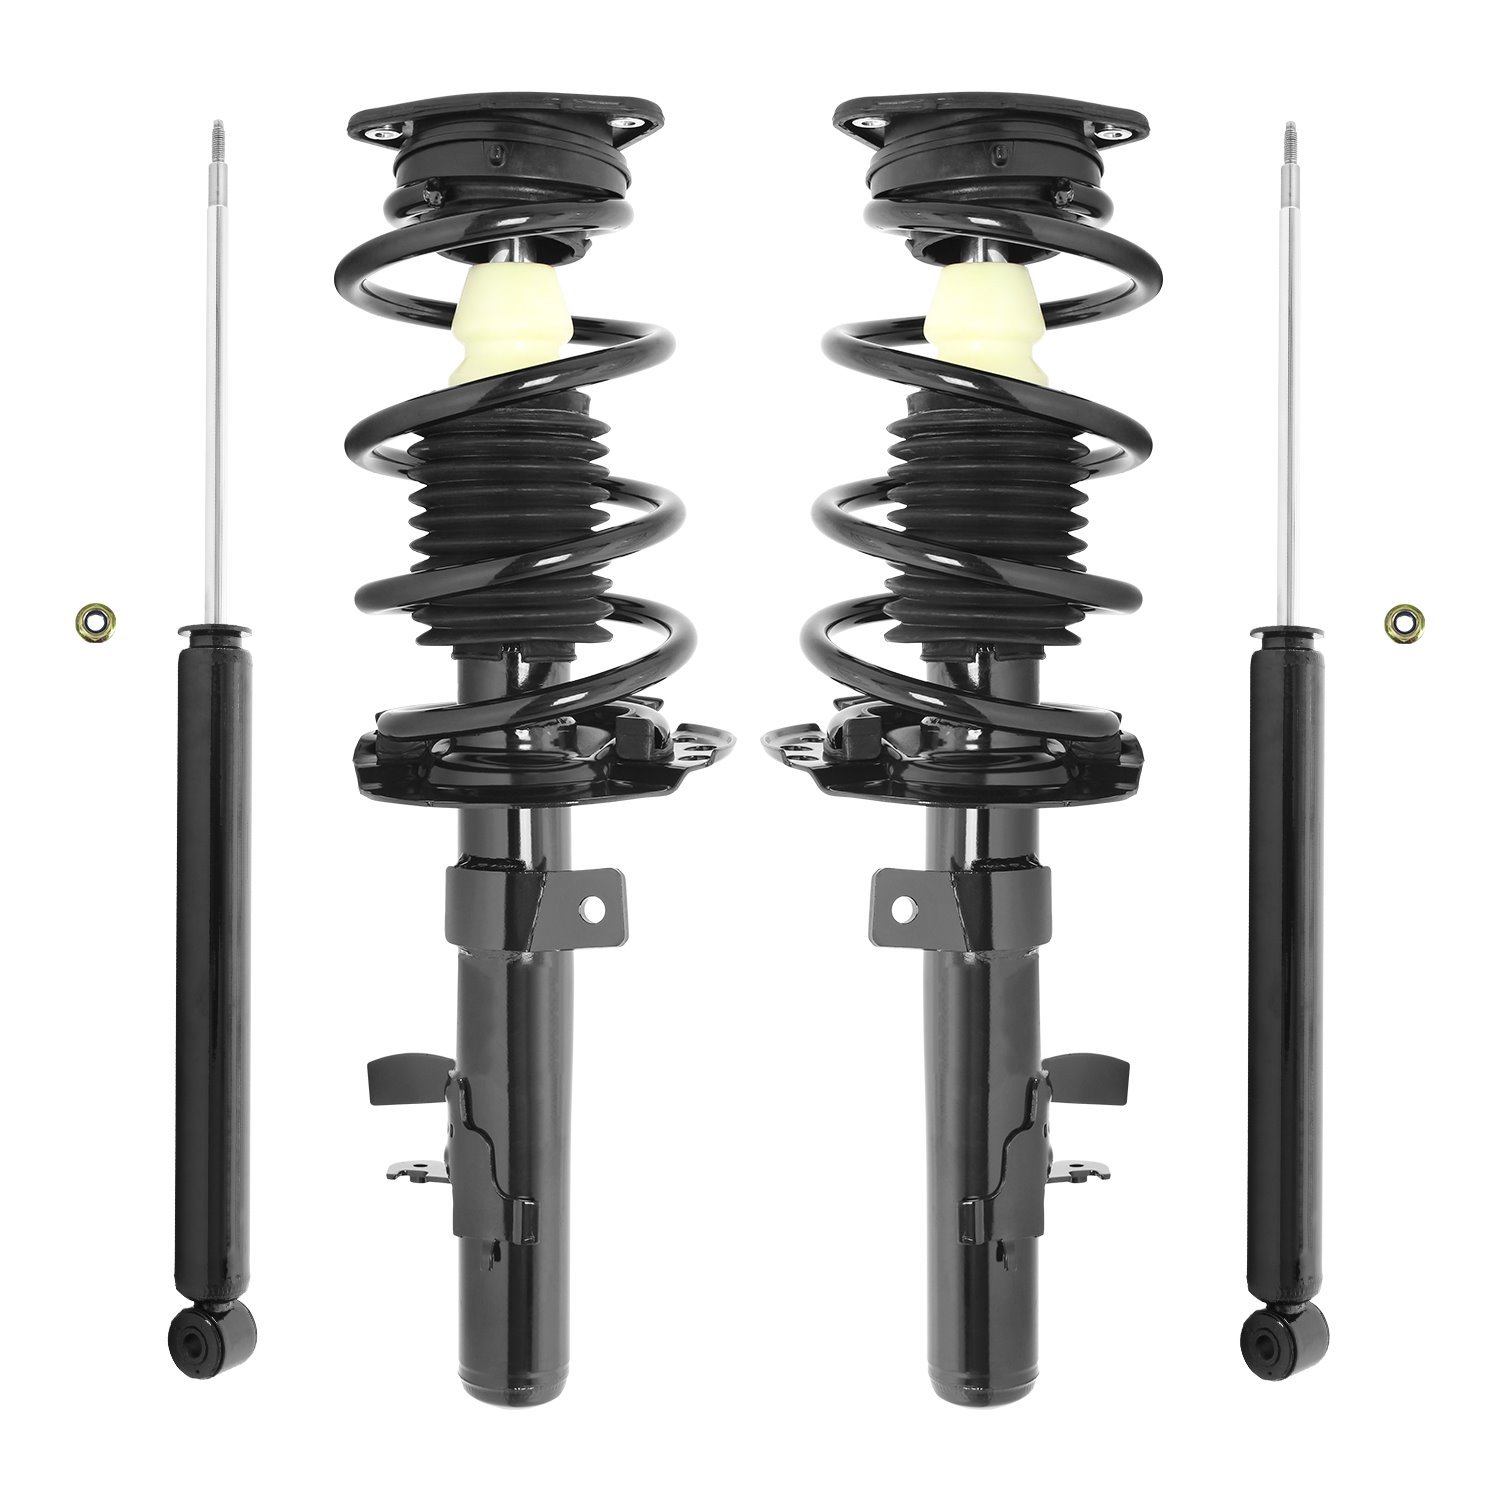 4-11973-252420-001 Front & Rear Suspension Strut & Coil Spring Assembly Fits Select Ford Escape